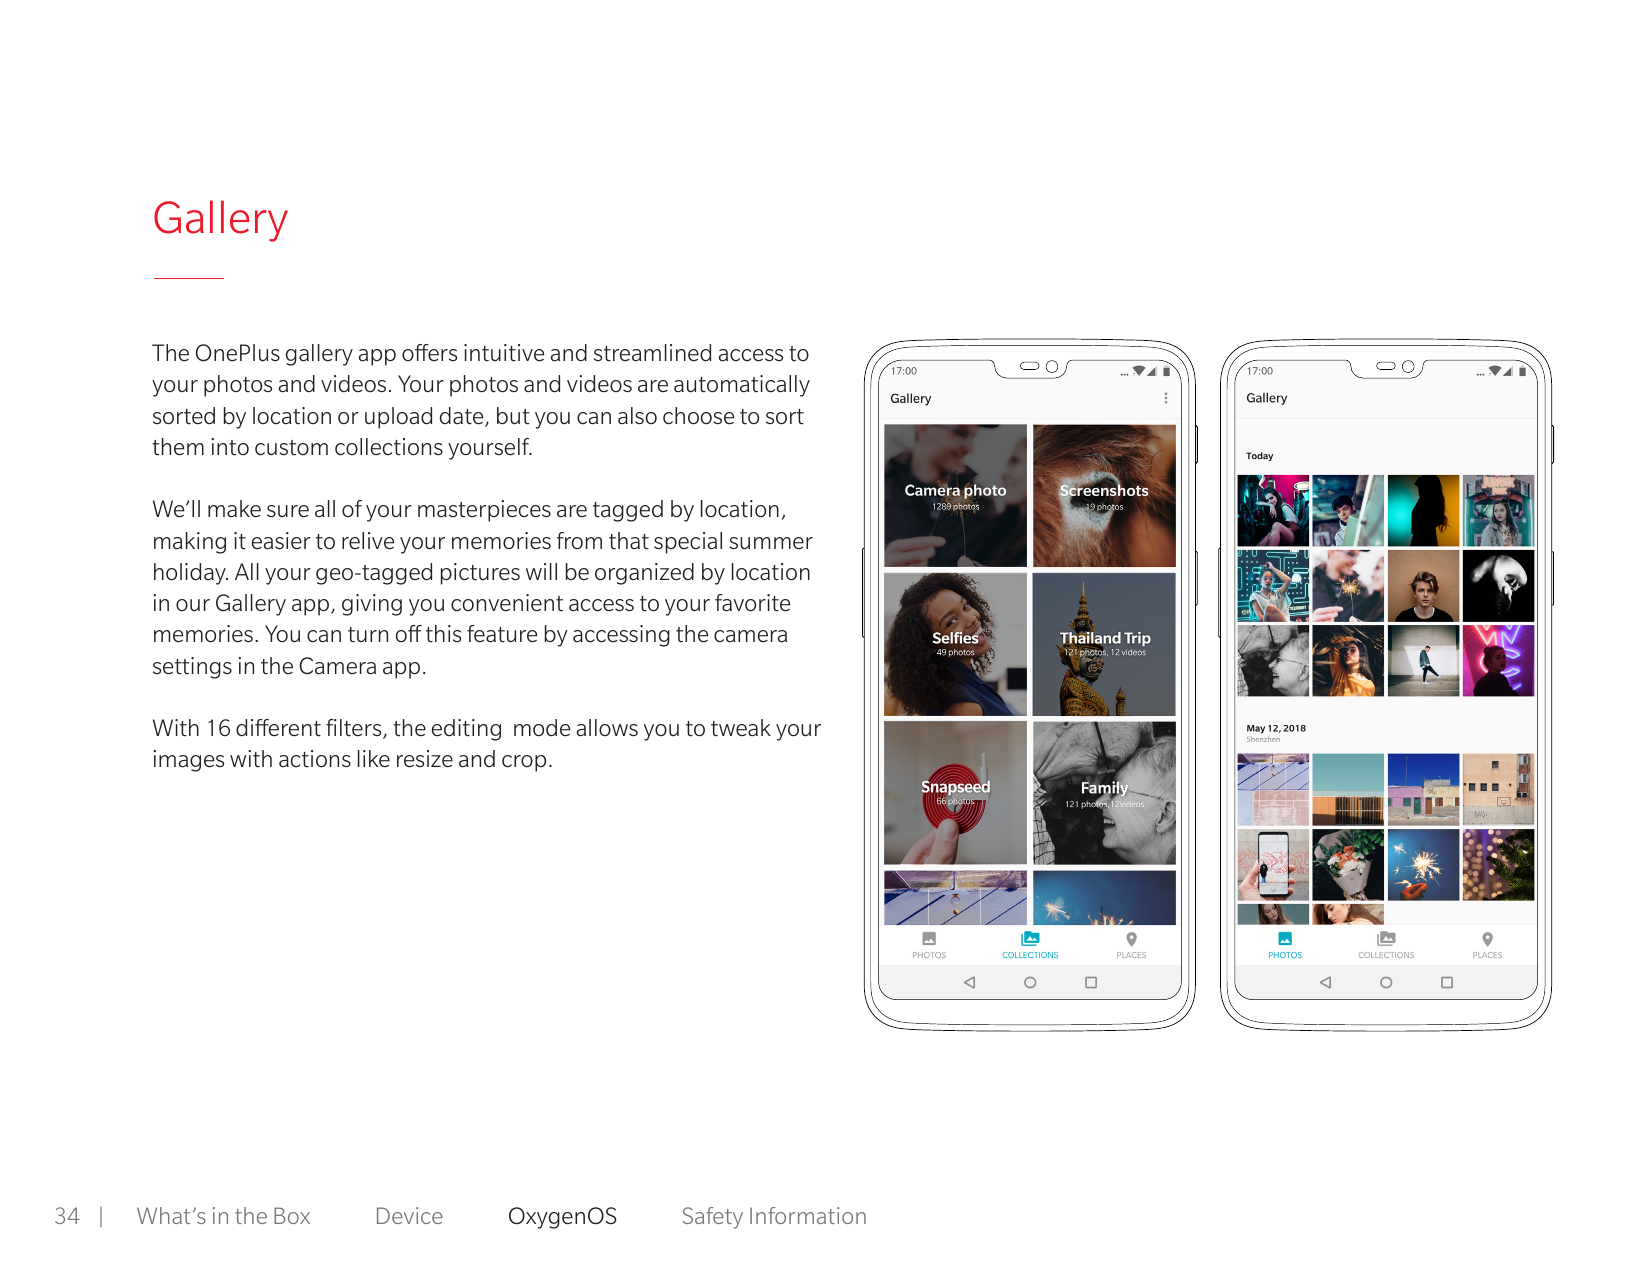 GalleryThe OnePlus gallery app offers intuitive and streamlined access toyour photos and videos. Your photos and videos are auto